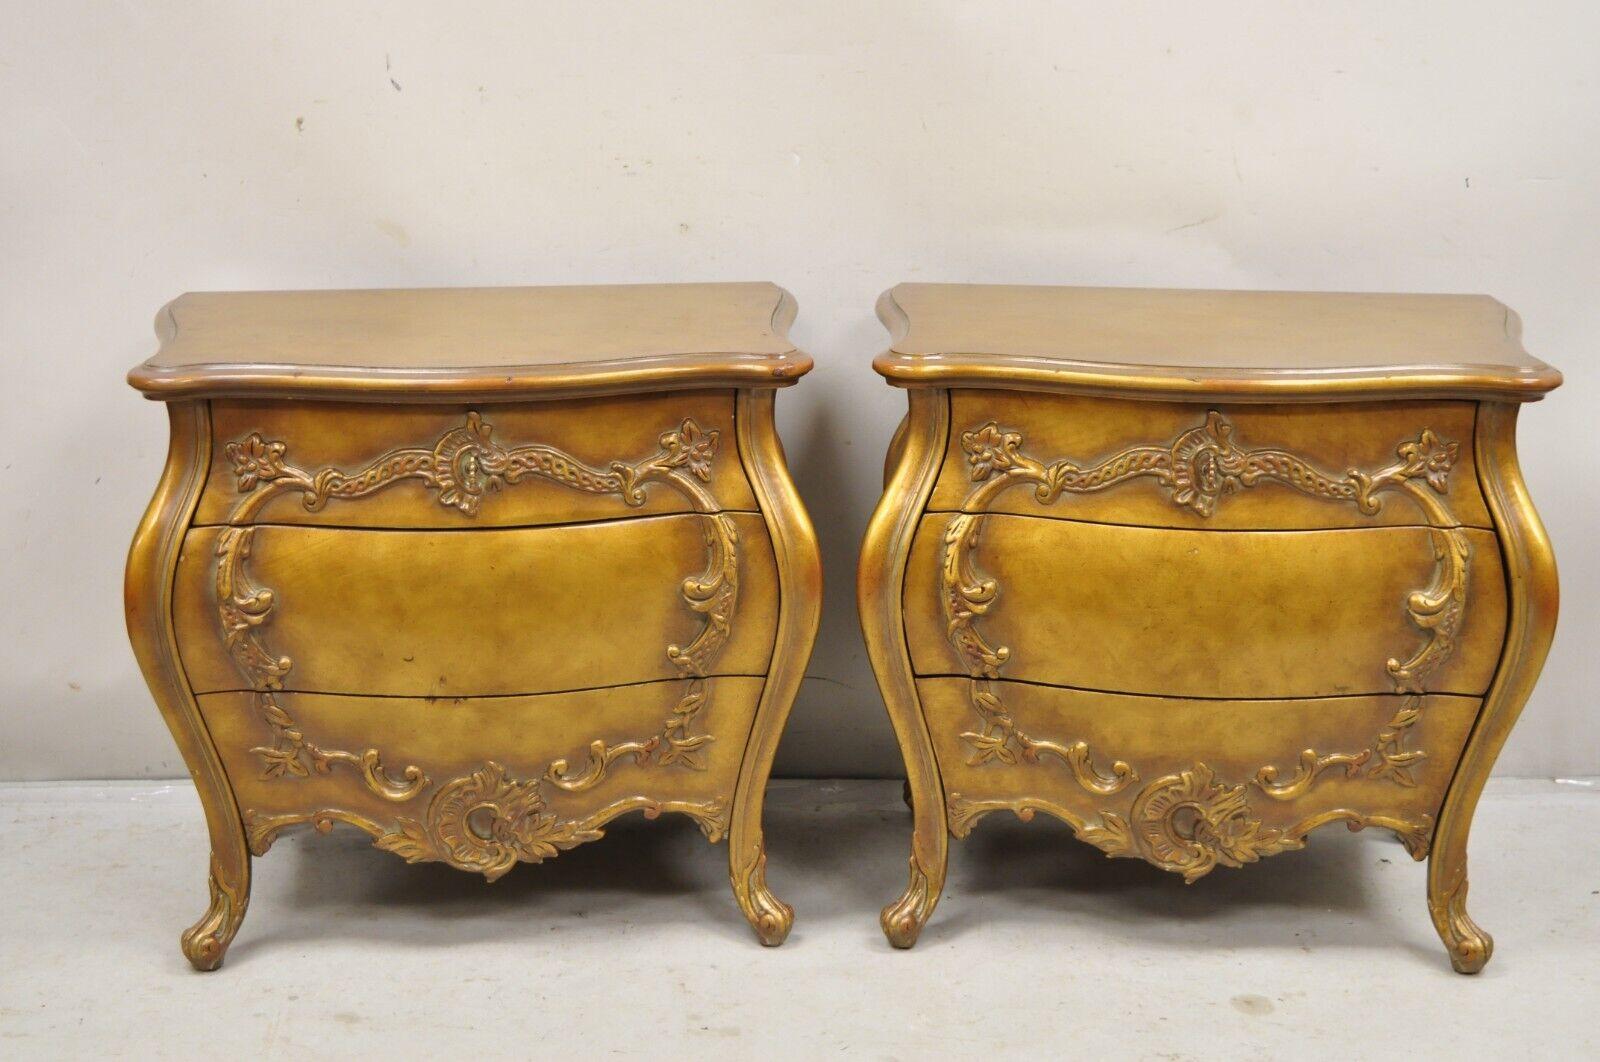 Vintage French Rococo Baroque Style Gold Gilt Bombe Nightstands -  a Pair. Item features heavy solid wood construction, distressed gold gilt finish, shapely bombe form, 3 dovetailed drawers, quality American craftsmanship. Circa Mid 20th Century.